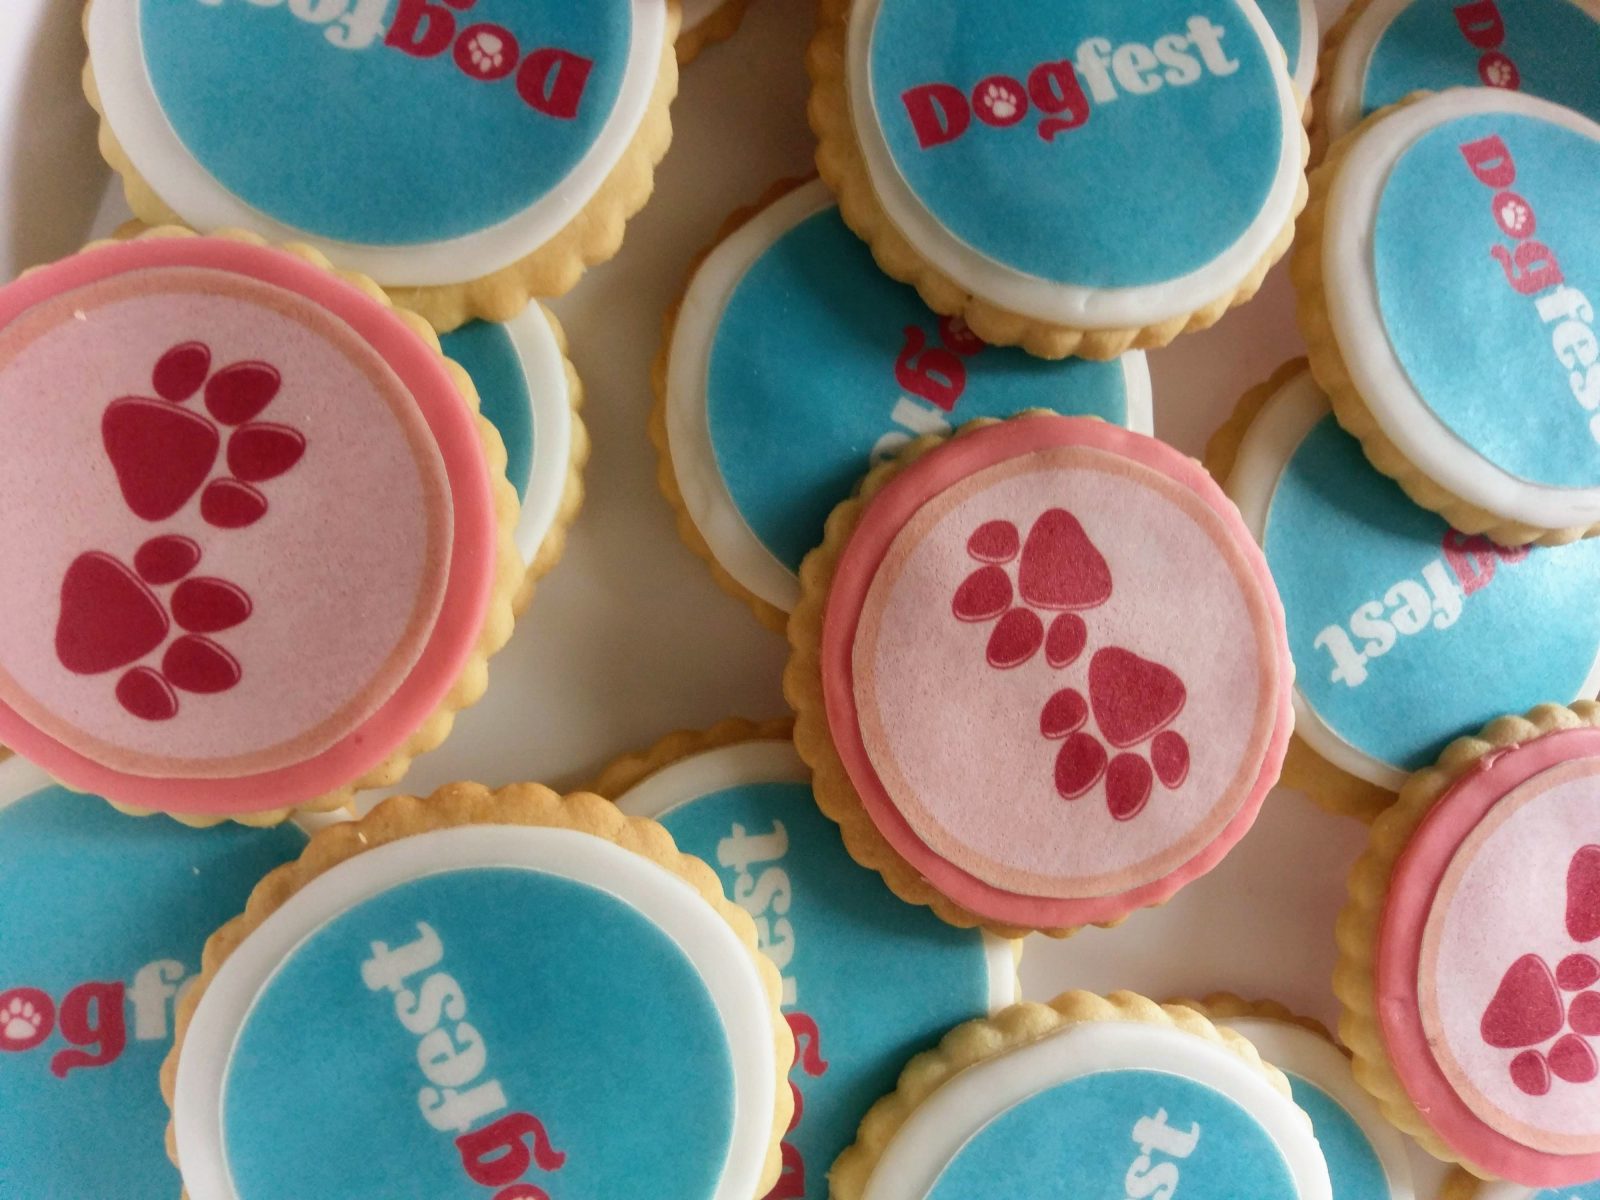 Dog Fest Dog Paw biscuits made by Bloom Bakers